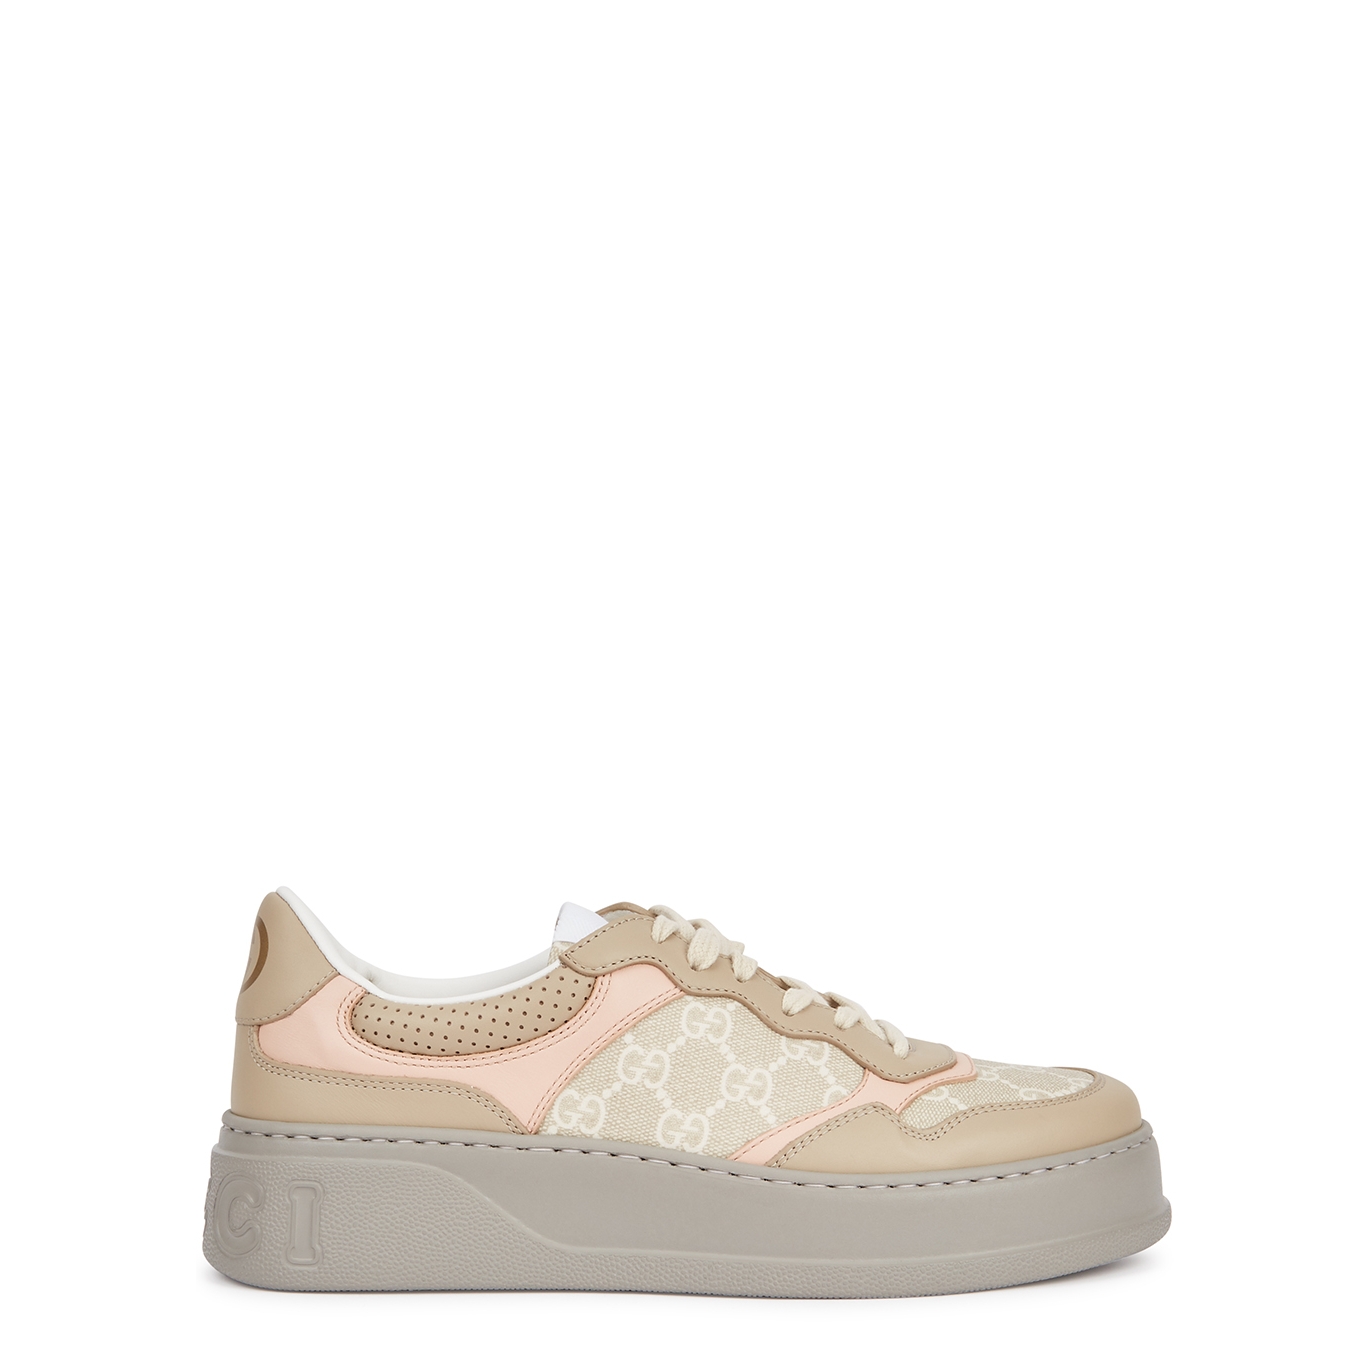 Gucci Chunky B Monogrammed Canvas And Leather Sneakers - Beige - 3.5